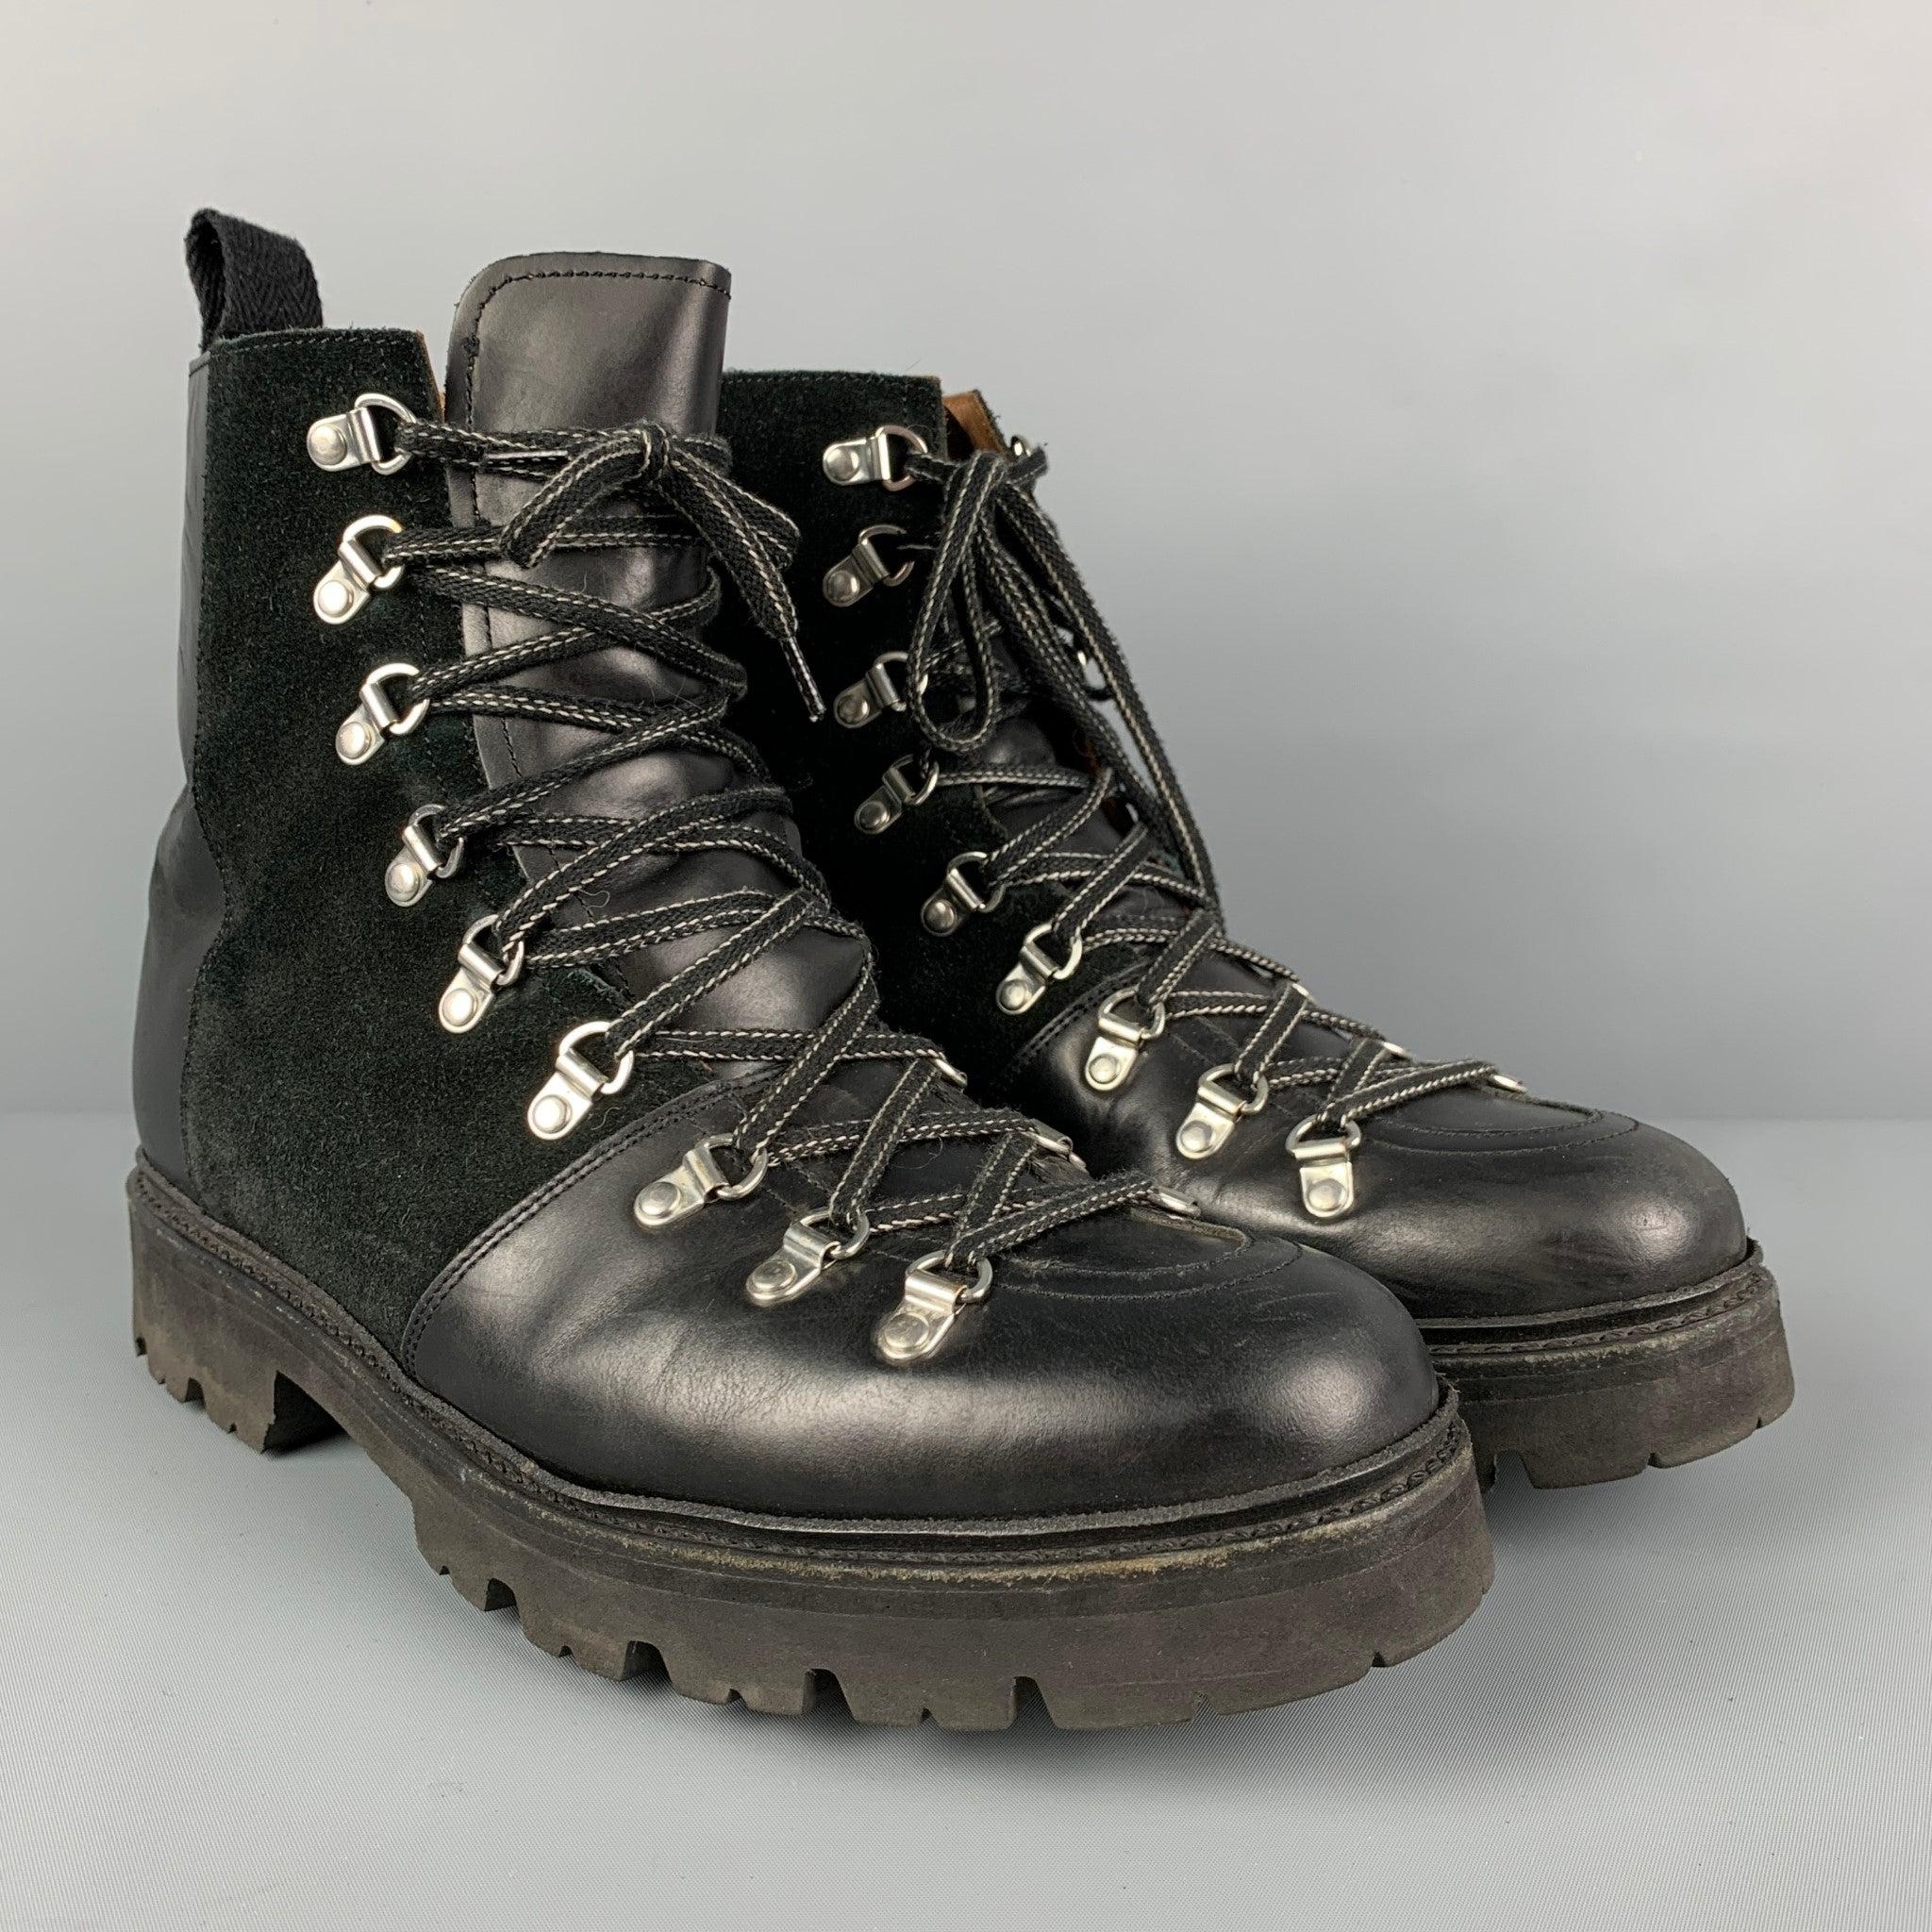 GRENSON boots comes in a black leather featuring a hiking style, suede panel, and a lace up closure. Comes with box. Very Good
Pre-Owned Condition. 

Marked:   110707 9 G  

Measurements: 
  Length: 12 inches  Width: 4.5 inches  Height: 6.25 inches